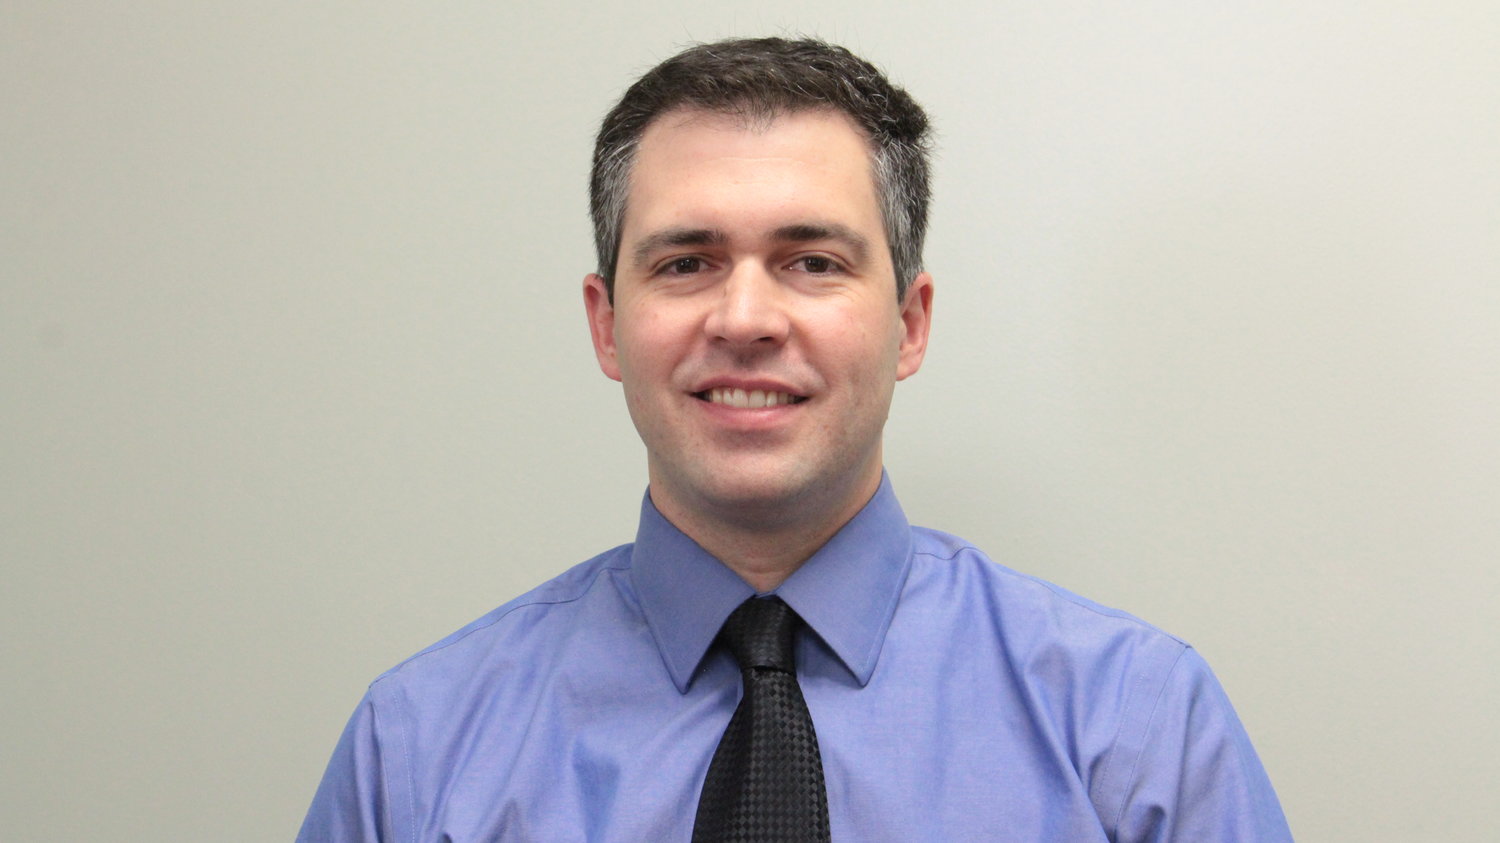 Dr. Sean Hattenbach has been in town a couple of months but is already treating the medical needs of area residents. You can find the family medicine physician at the Sievers Clinic.